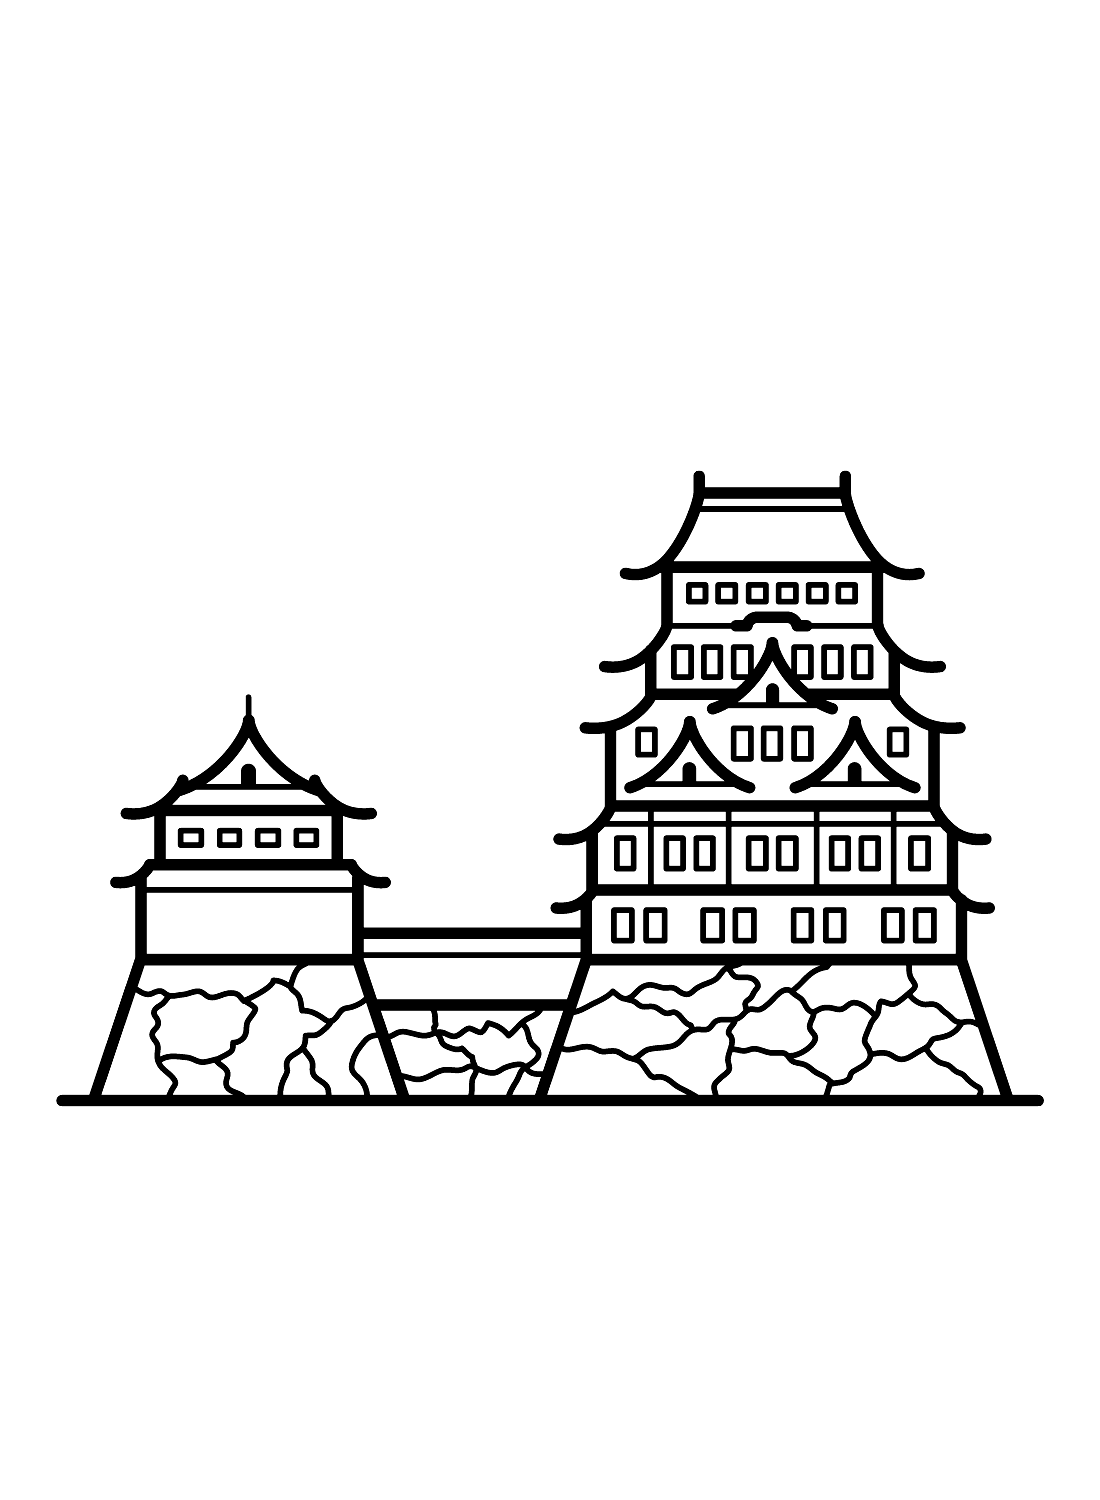 Japan Coloring Pages Online For Kids!